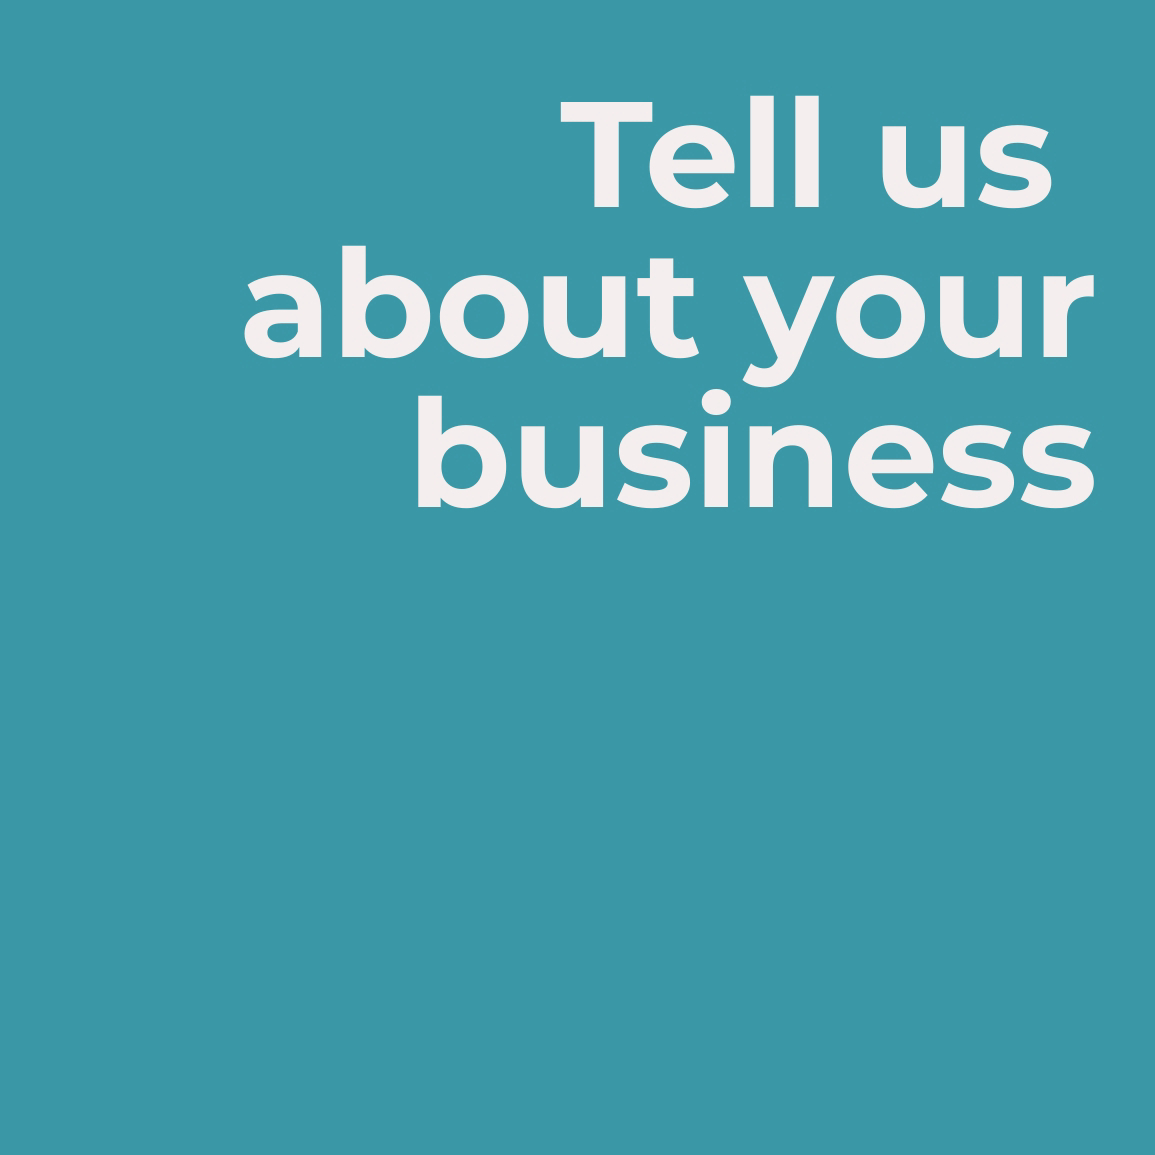 We want to hear what YOU are all about! 
Share a little about your business in the comments below and let's grow the Corjl Community ☺️
#Corjl #CorjlTemplate #CorjlFreedom #SaaS #GrowYourBusiness #Business